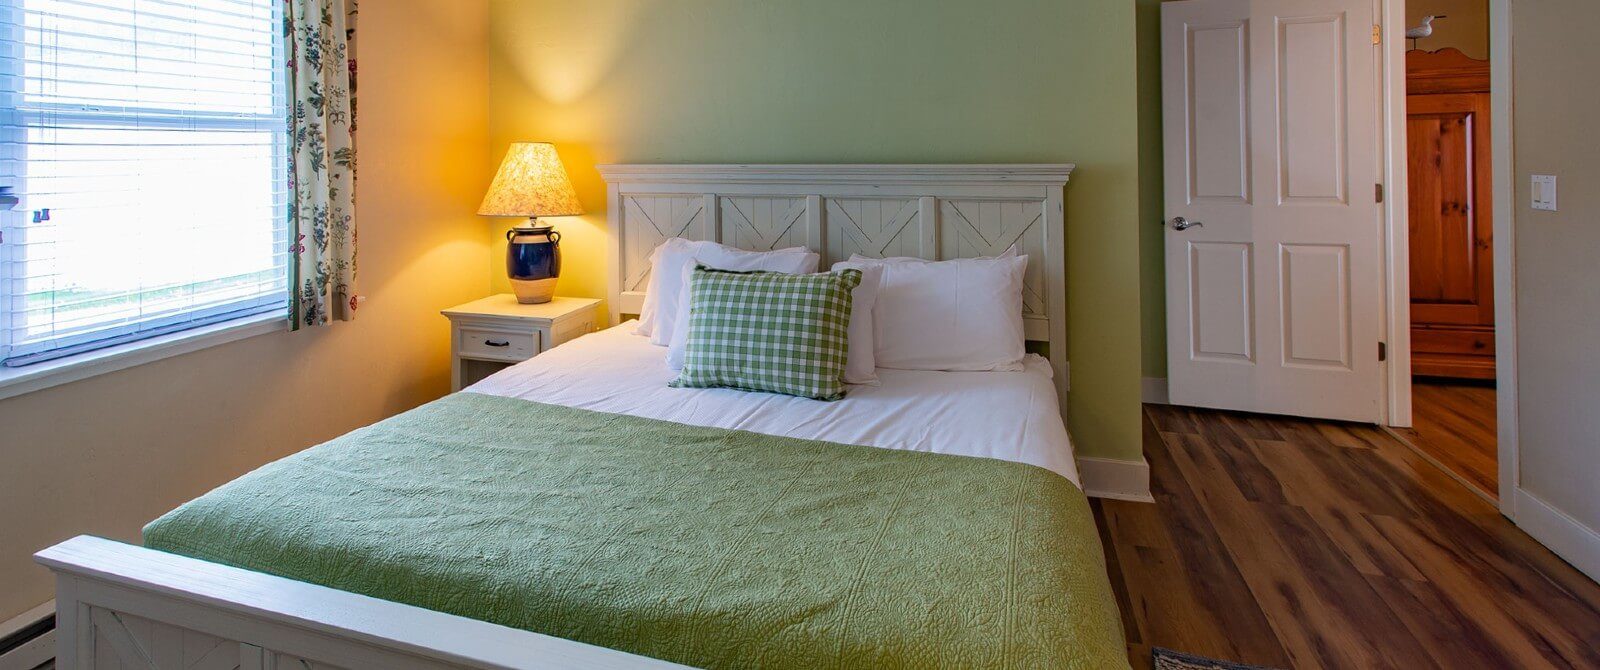 Bedroom with queen bed in white and green, table with lamp, a bright window and hardwood floors